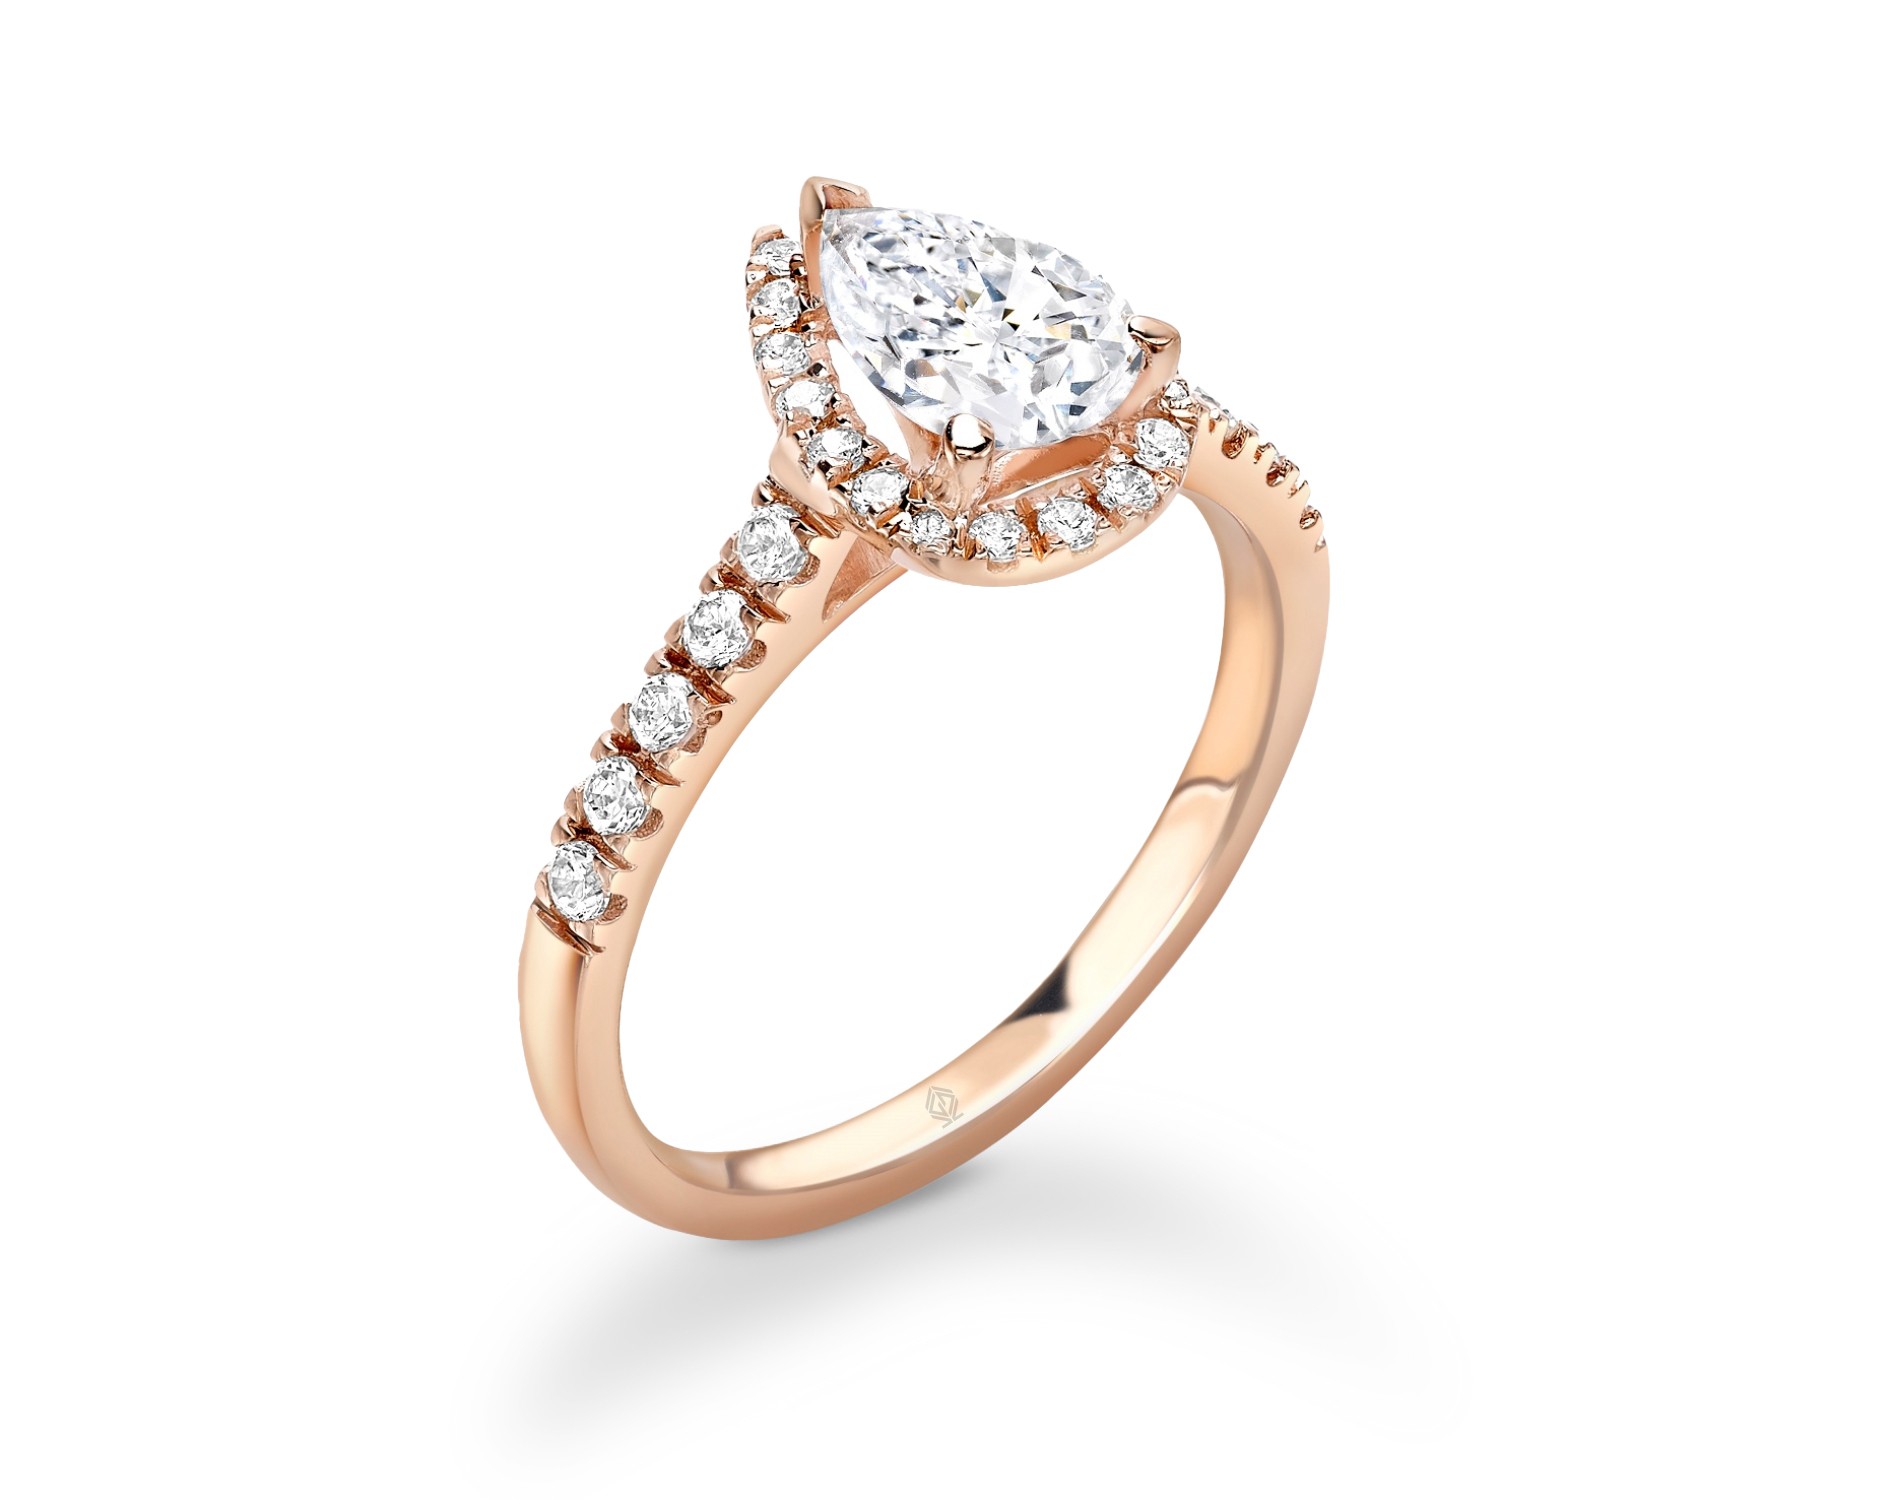 18K ROSE GOLD HALO PEAR CUT DIAMOND ENGAGEMENT RING WITH SIDE STONES PAVE SET